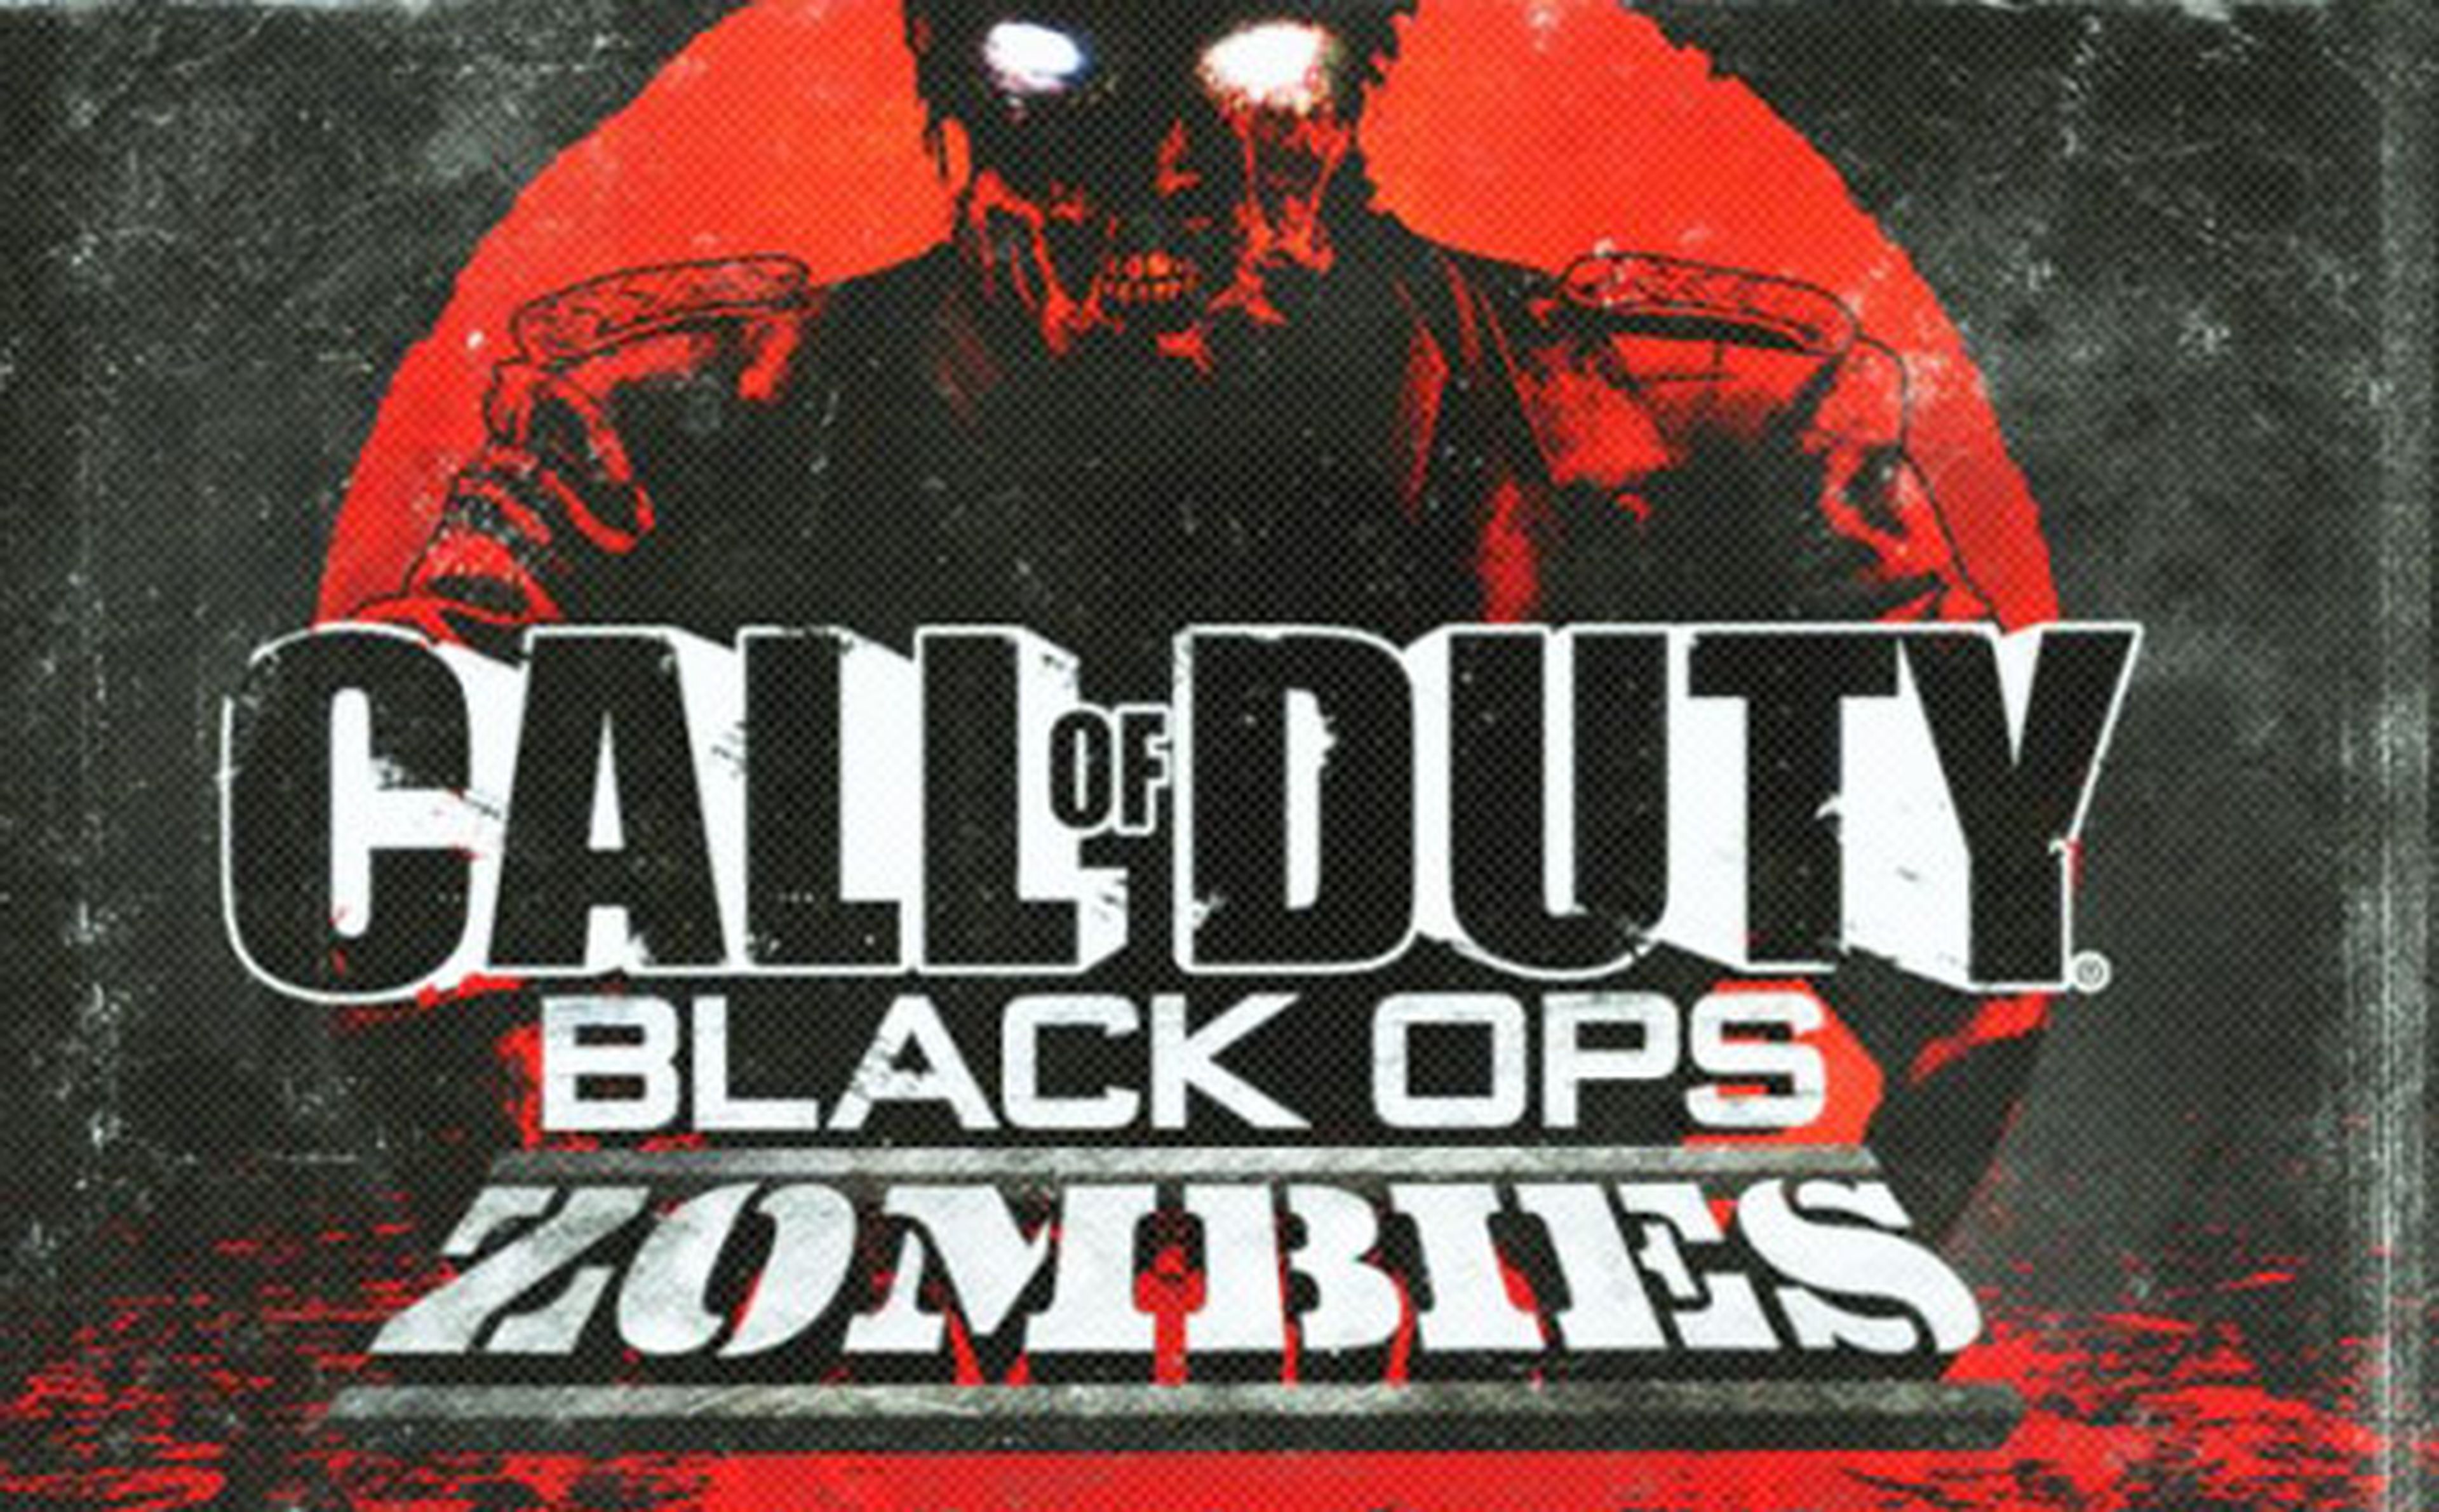 Llega Call of Duty Black Ops Zombis